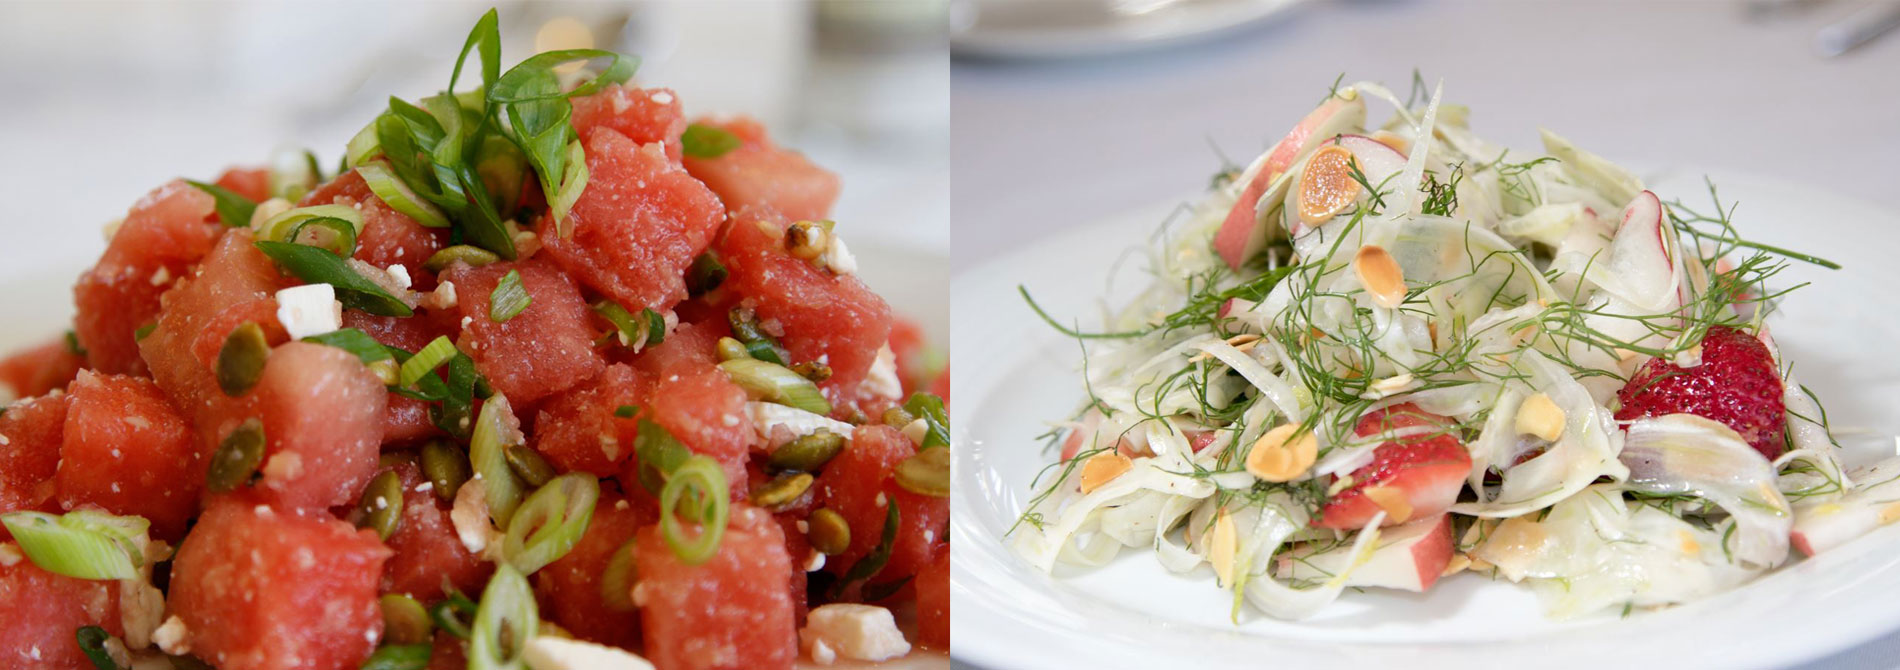 Watermelon and feta salad and Shaved Fennel Summer Salad with Strawberry, Peach and Toasted Almonds